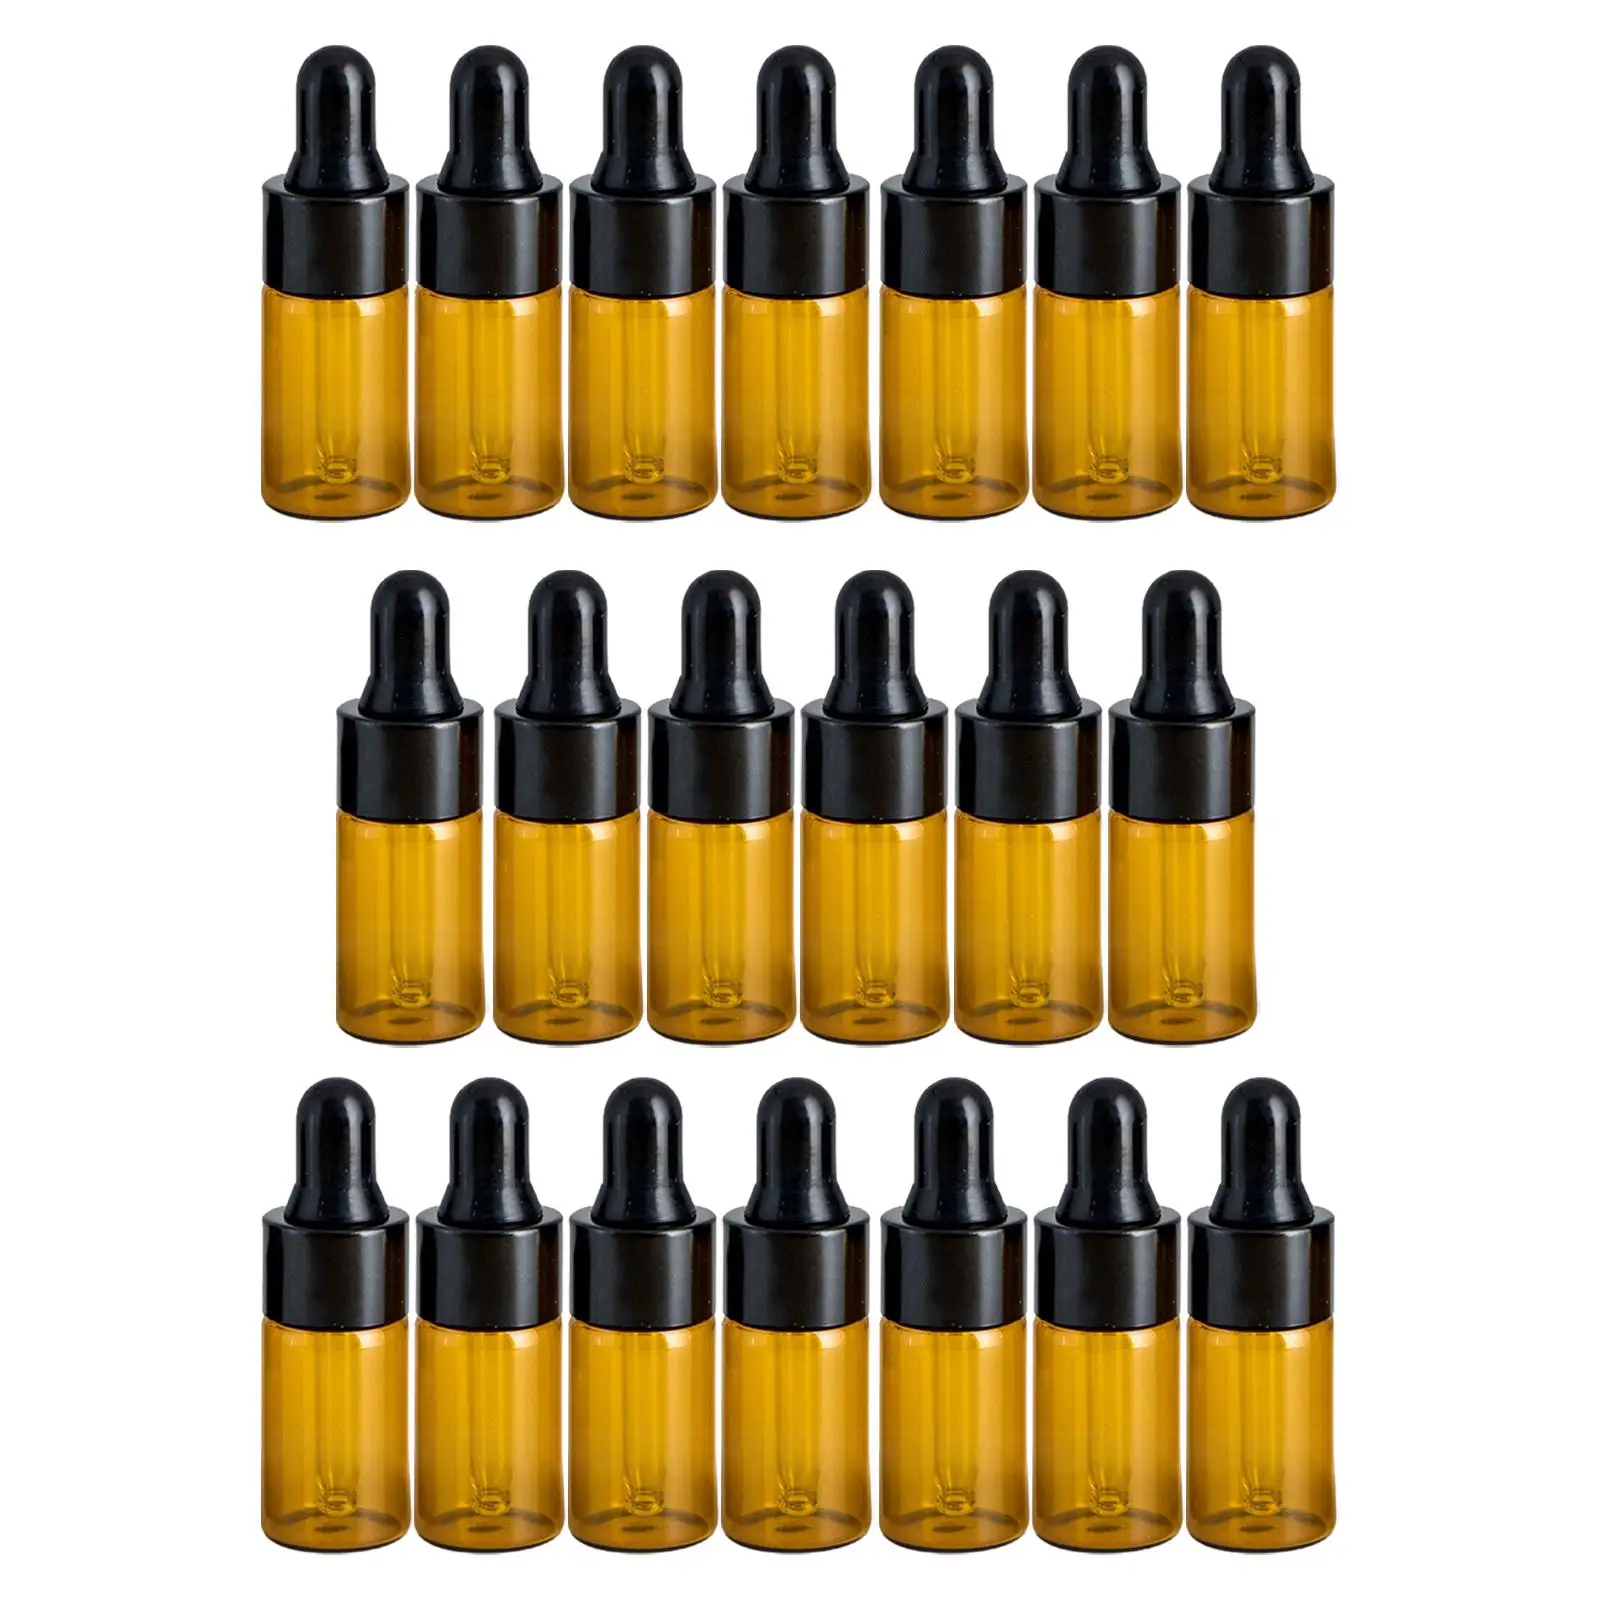 Small Dropper Bottles with Glass Eye Dropper Sample Vial for Essential Oils